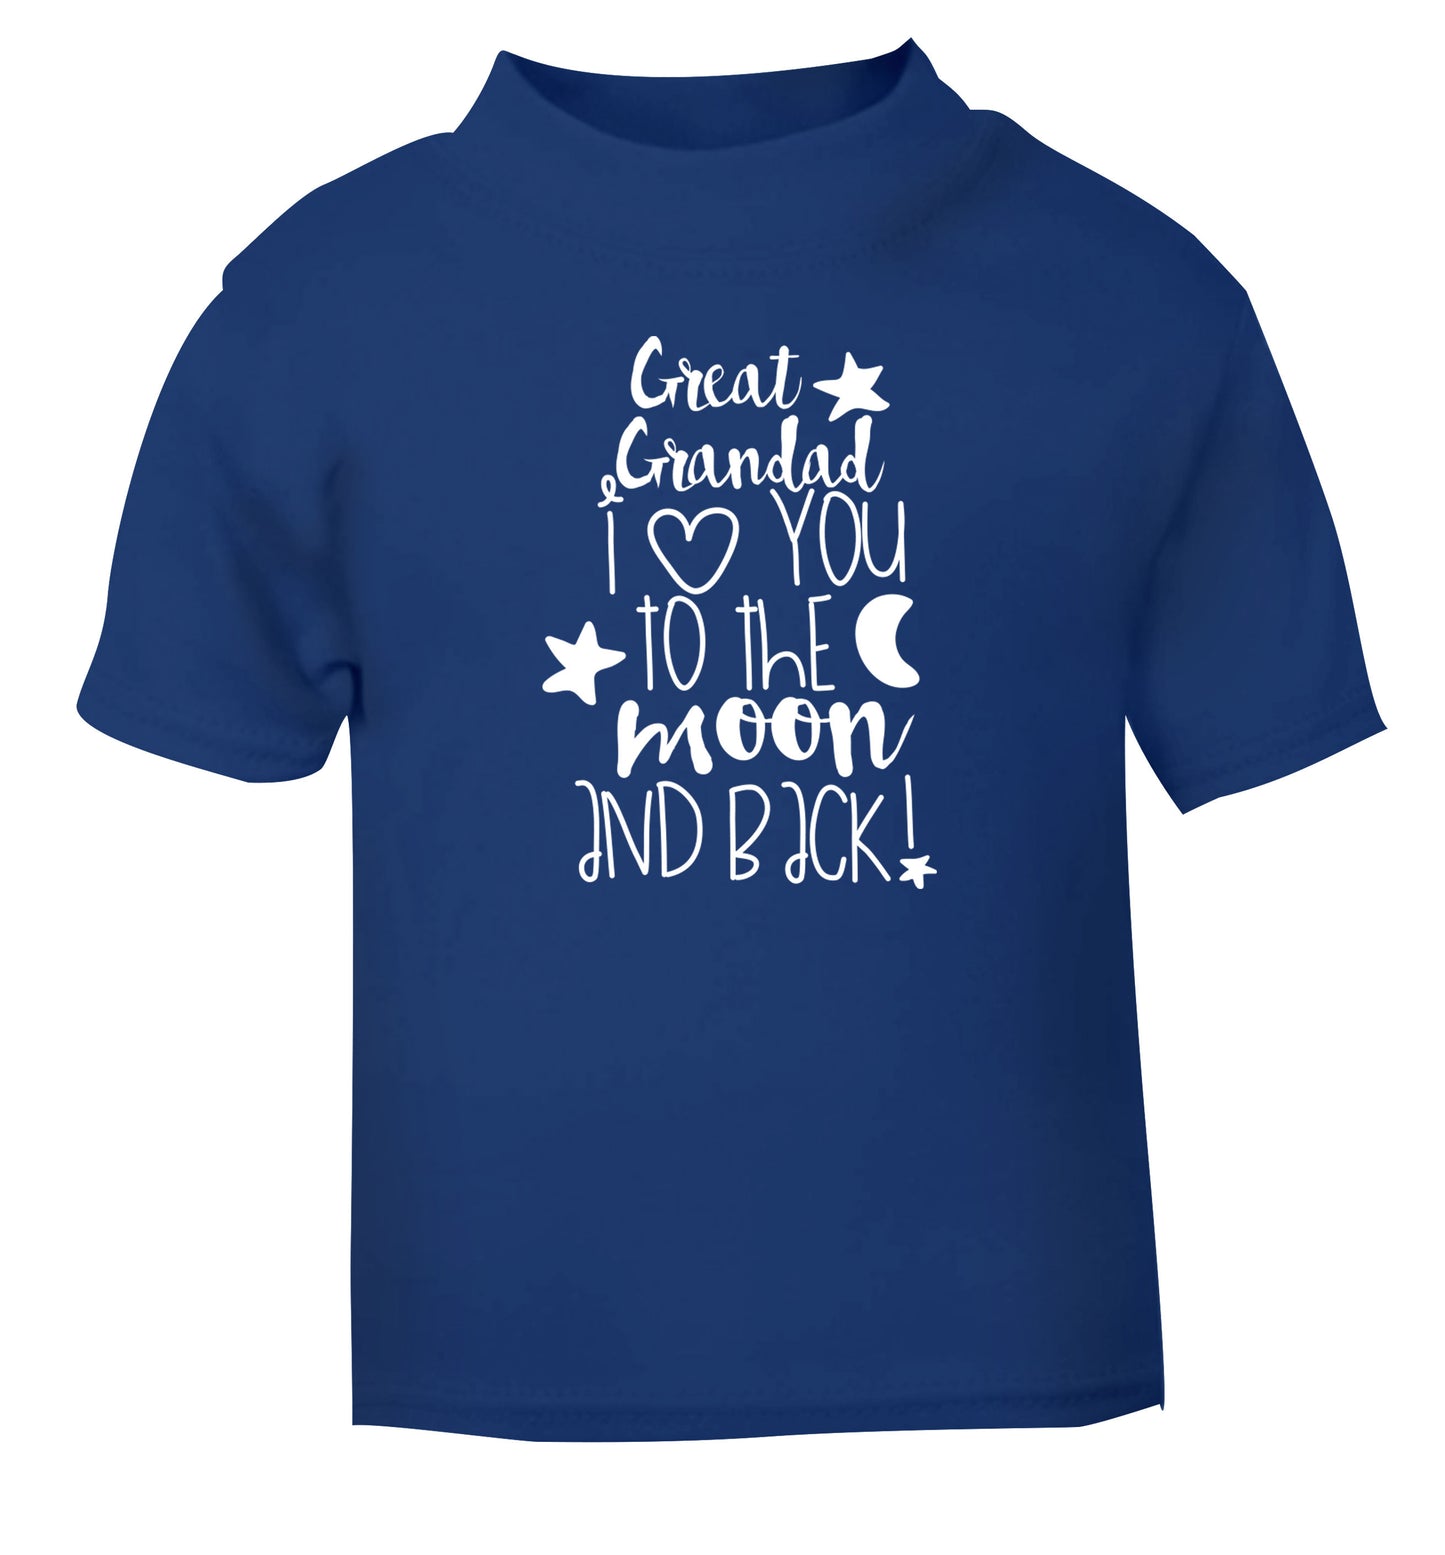 Great Grandad I love you to the moon and back blue Baby Toddler Tshirt 2 Years